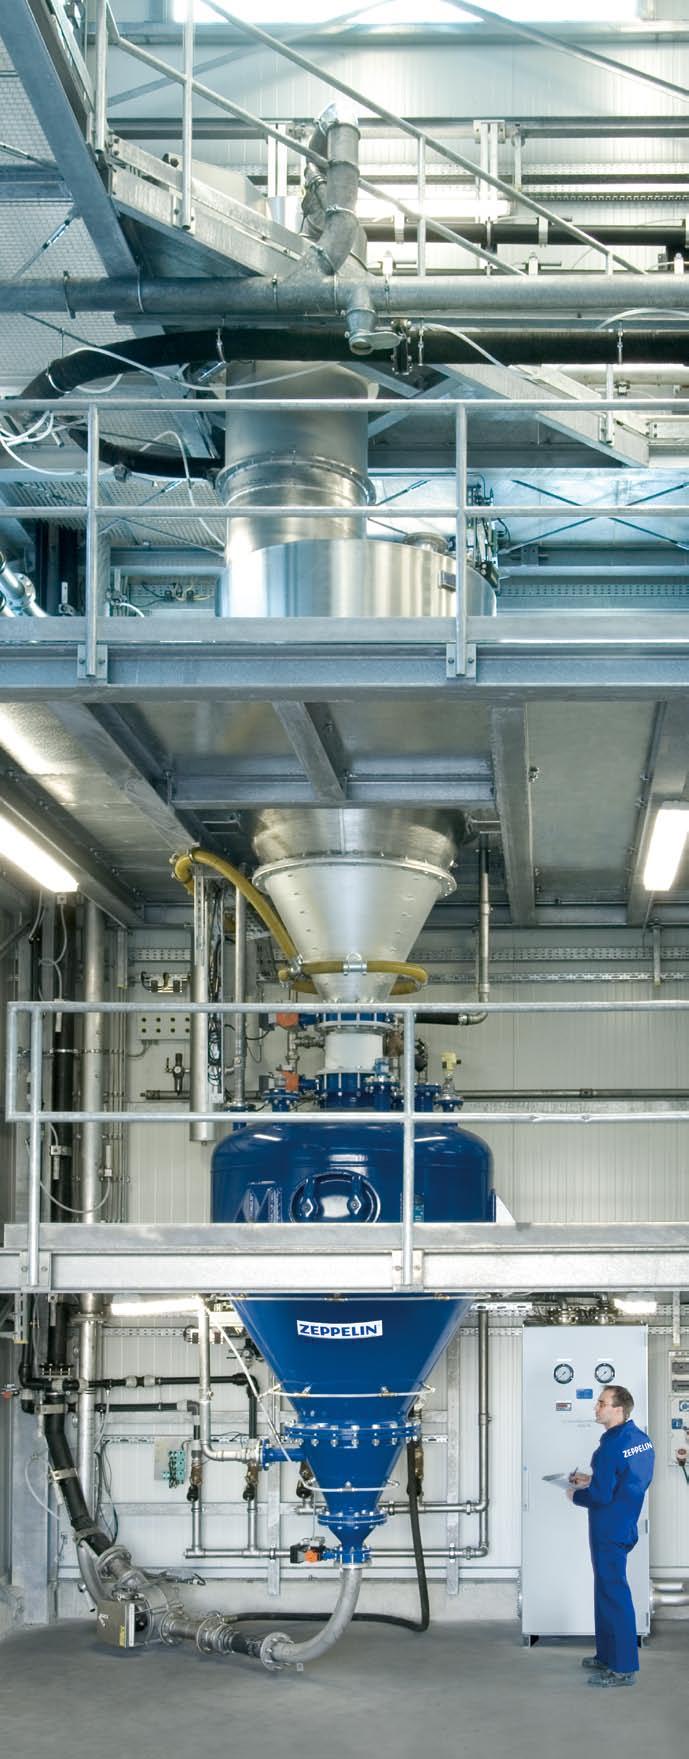 Being the technological leader Zeppelin provides a powerful Development and Test Center supporting different technologies for handling bulk solids.